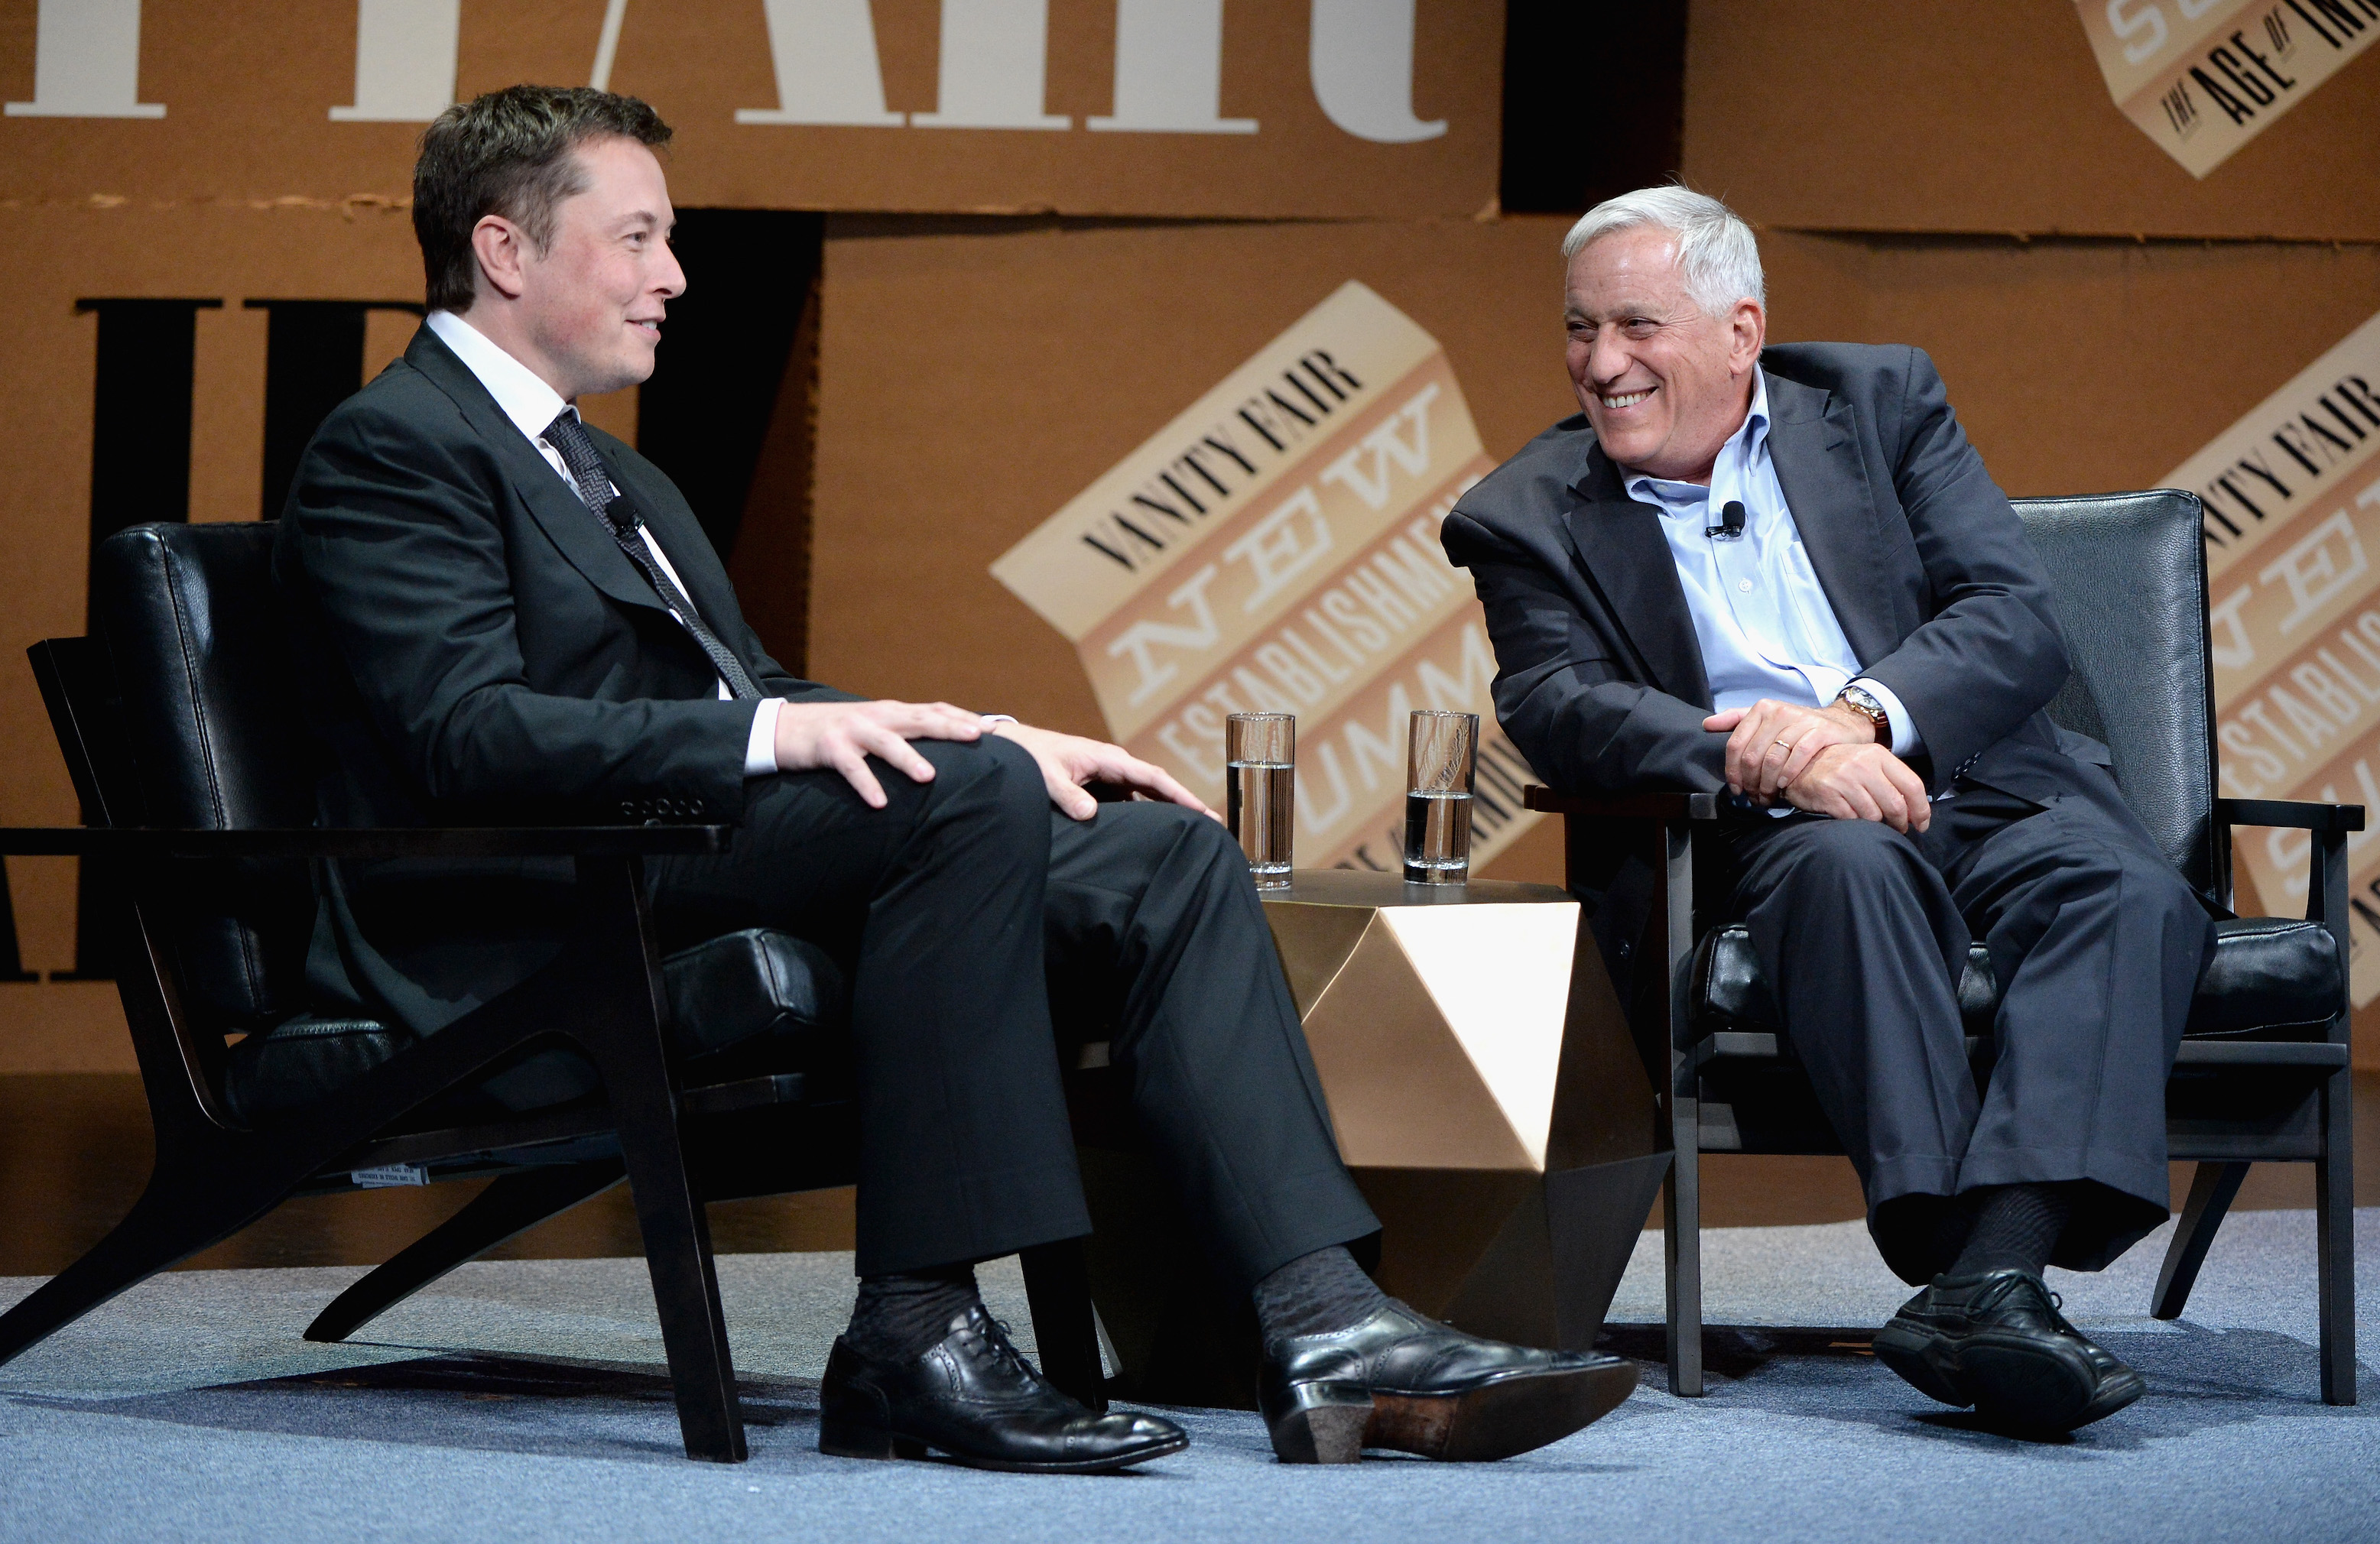 Walter Isaacson (right) and Elon Musk (left) speak onstage at the Vanity Fair New Establishment Summit back in 2014, long before Isaacson wrote a big biography of Musk.